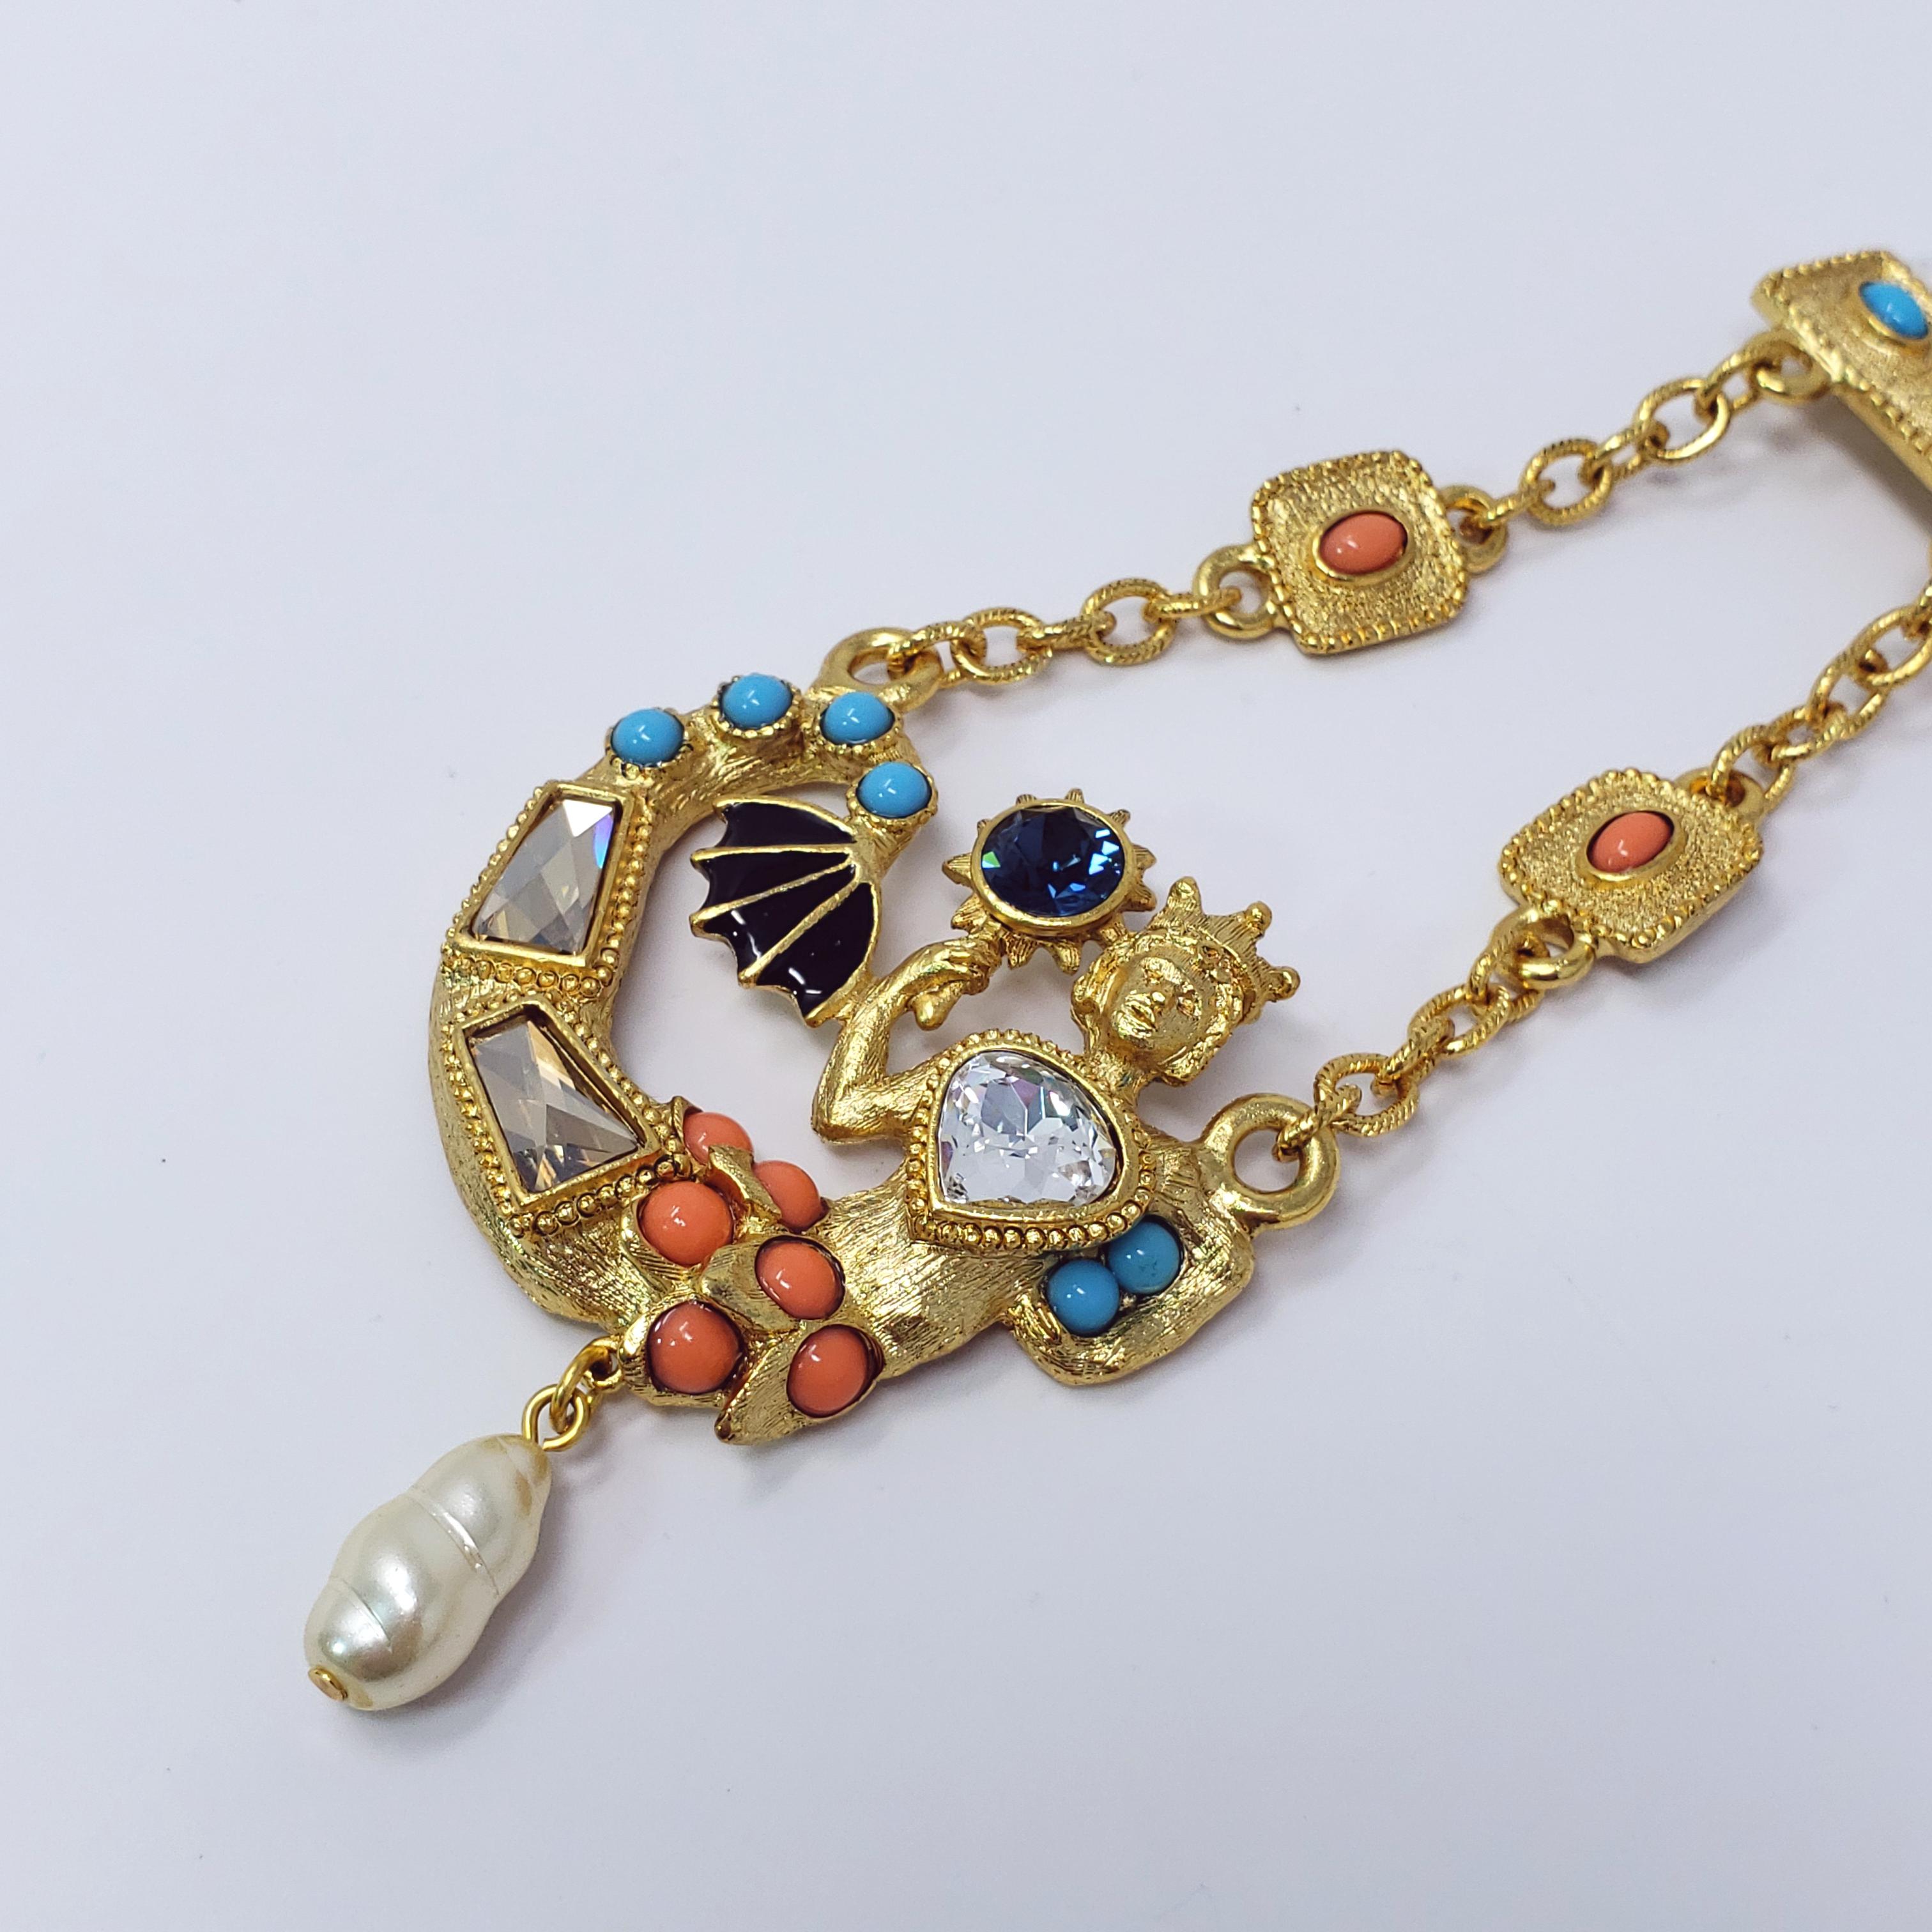 Renaissance-inspired mermaid brooch by designer Kenneth Jay Lane. Gold plated dangling mermaid accented with faceted clear, sapphire, and light topaz colored crystals, coral & turquoise colored cabochons, and black enamel. A single faux pearl hangs